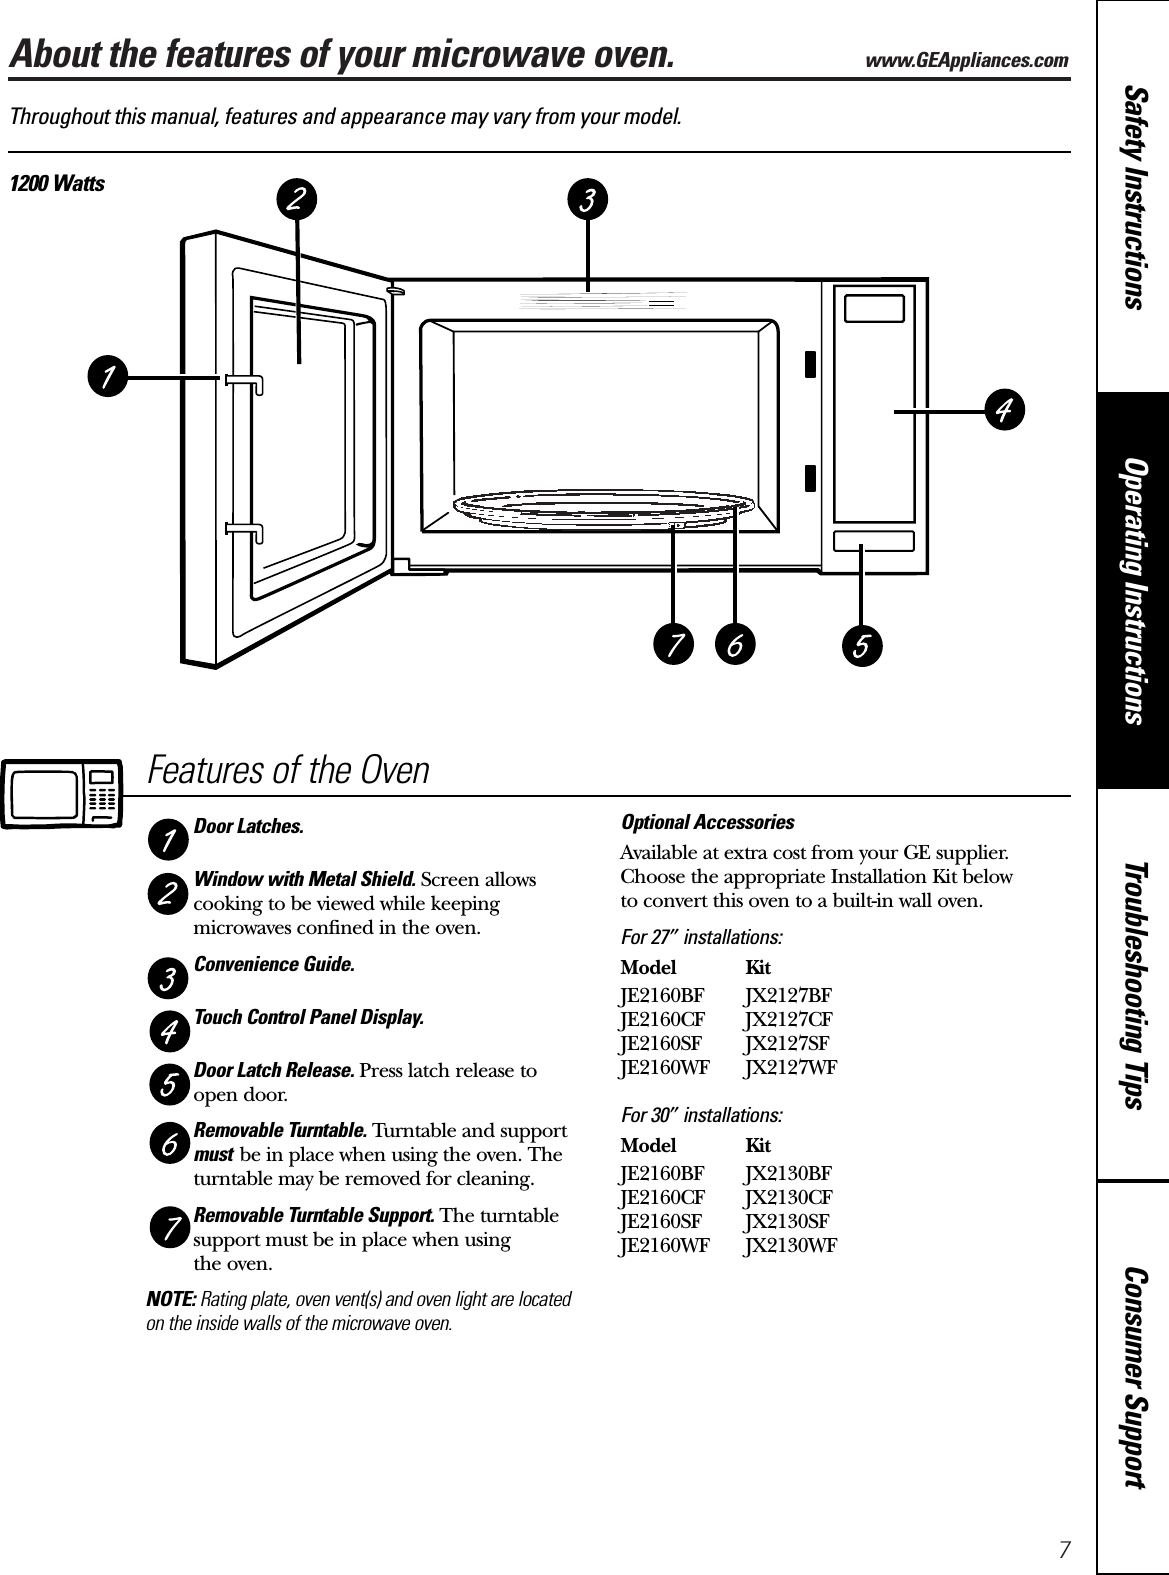 7About the features of your microwave oven.  www.GEAppliances.comConsumer SupportTroubleshooting TipsOperating InstructionsSafety InstructionsThroughout this manual, features and appearance may vary from your model.1200 WattsFeatures of the OvenDoor Latches.Window with Metal Shield. Screen allowscooking to be viewed while keepingmicrowaves confined in the oven.Convenience Guide.Touch Control Panel Display.Door Latch Release. Press latch release to open door.Removable Turntable. Turntable and supportmust be in place when using the oven. Theturntable may be removed for cleaning.Removable Turntable Support. The turntablesupport must be in place when using the oven.NOTE: Rating plate, oven vent(s) and oven light are located on the inside walls of the microwave oven.Optional AccessoriesAvailable at extra cost from your GE supplier.Choose the appropriate Installation Kit below to convert this oven to a built-in wall oven.For 27″installations:Model KitJE2160BF JX2127BFJE2160CF JX2127CFJE2160SF JX2127SFJE2160WF JX2127WFFor 30″installations:Model KitJE2160BF JX2130BFJE2160CF JX2130CFJE2160SF JX2130SFJE2160WF JX2130WF